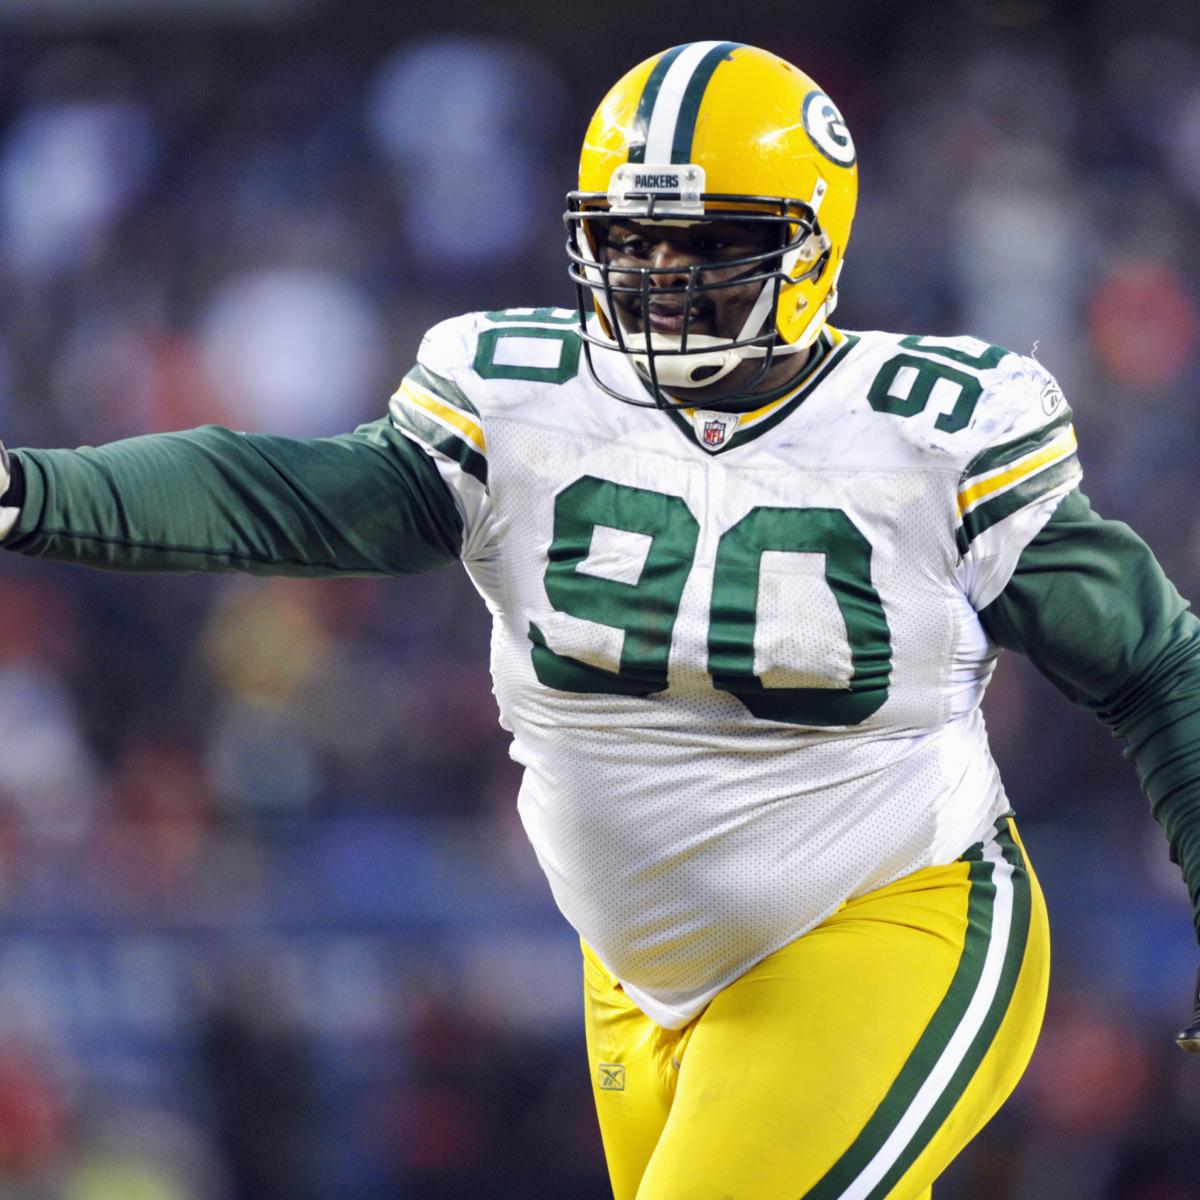 B.J. Raji Looking to Get Back to Pro Bowl Form